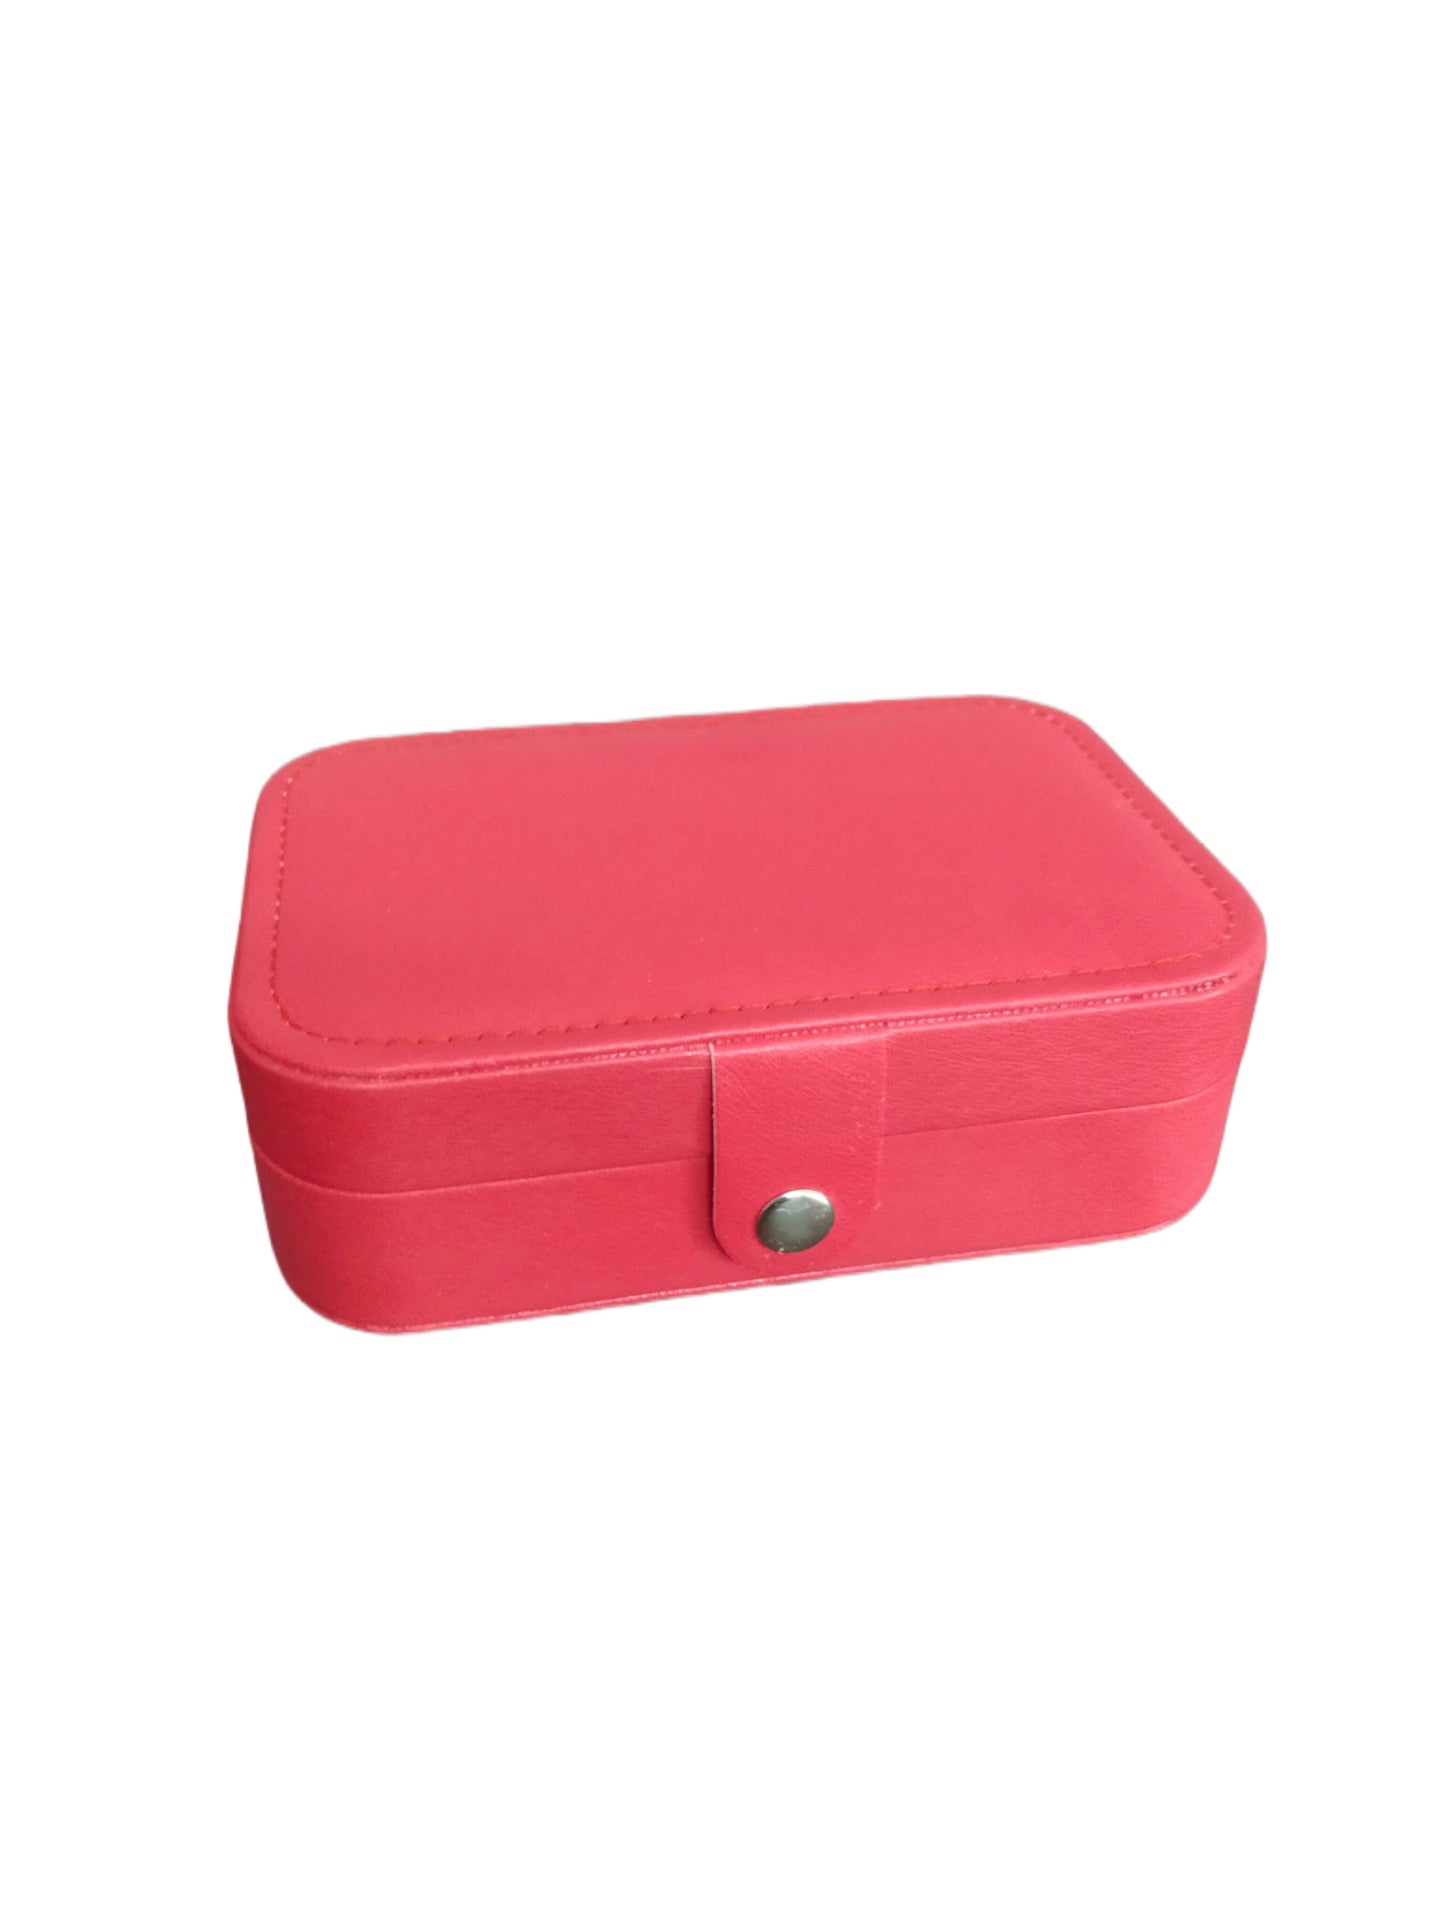 Red-color-jewellery-box-filled-with-earrings-and-rings jewellery-box-design designer-jewellery-box